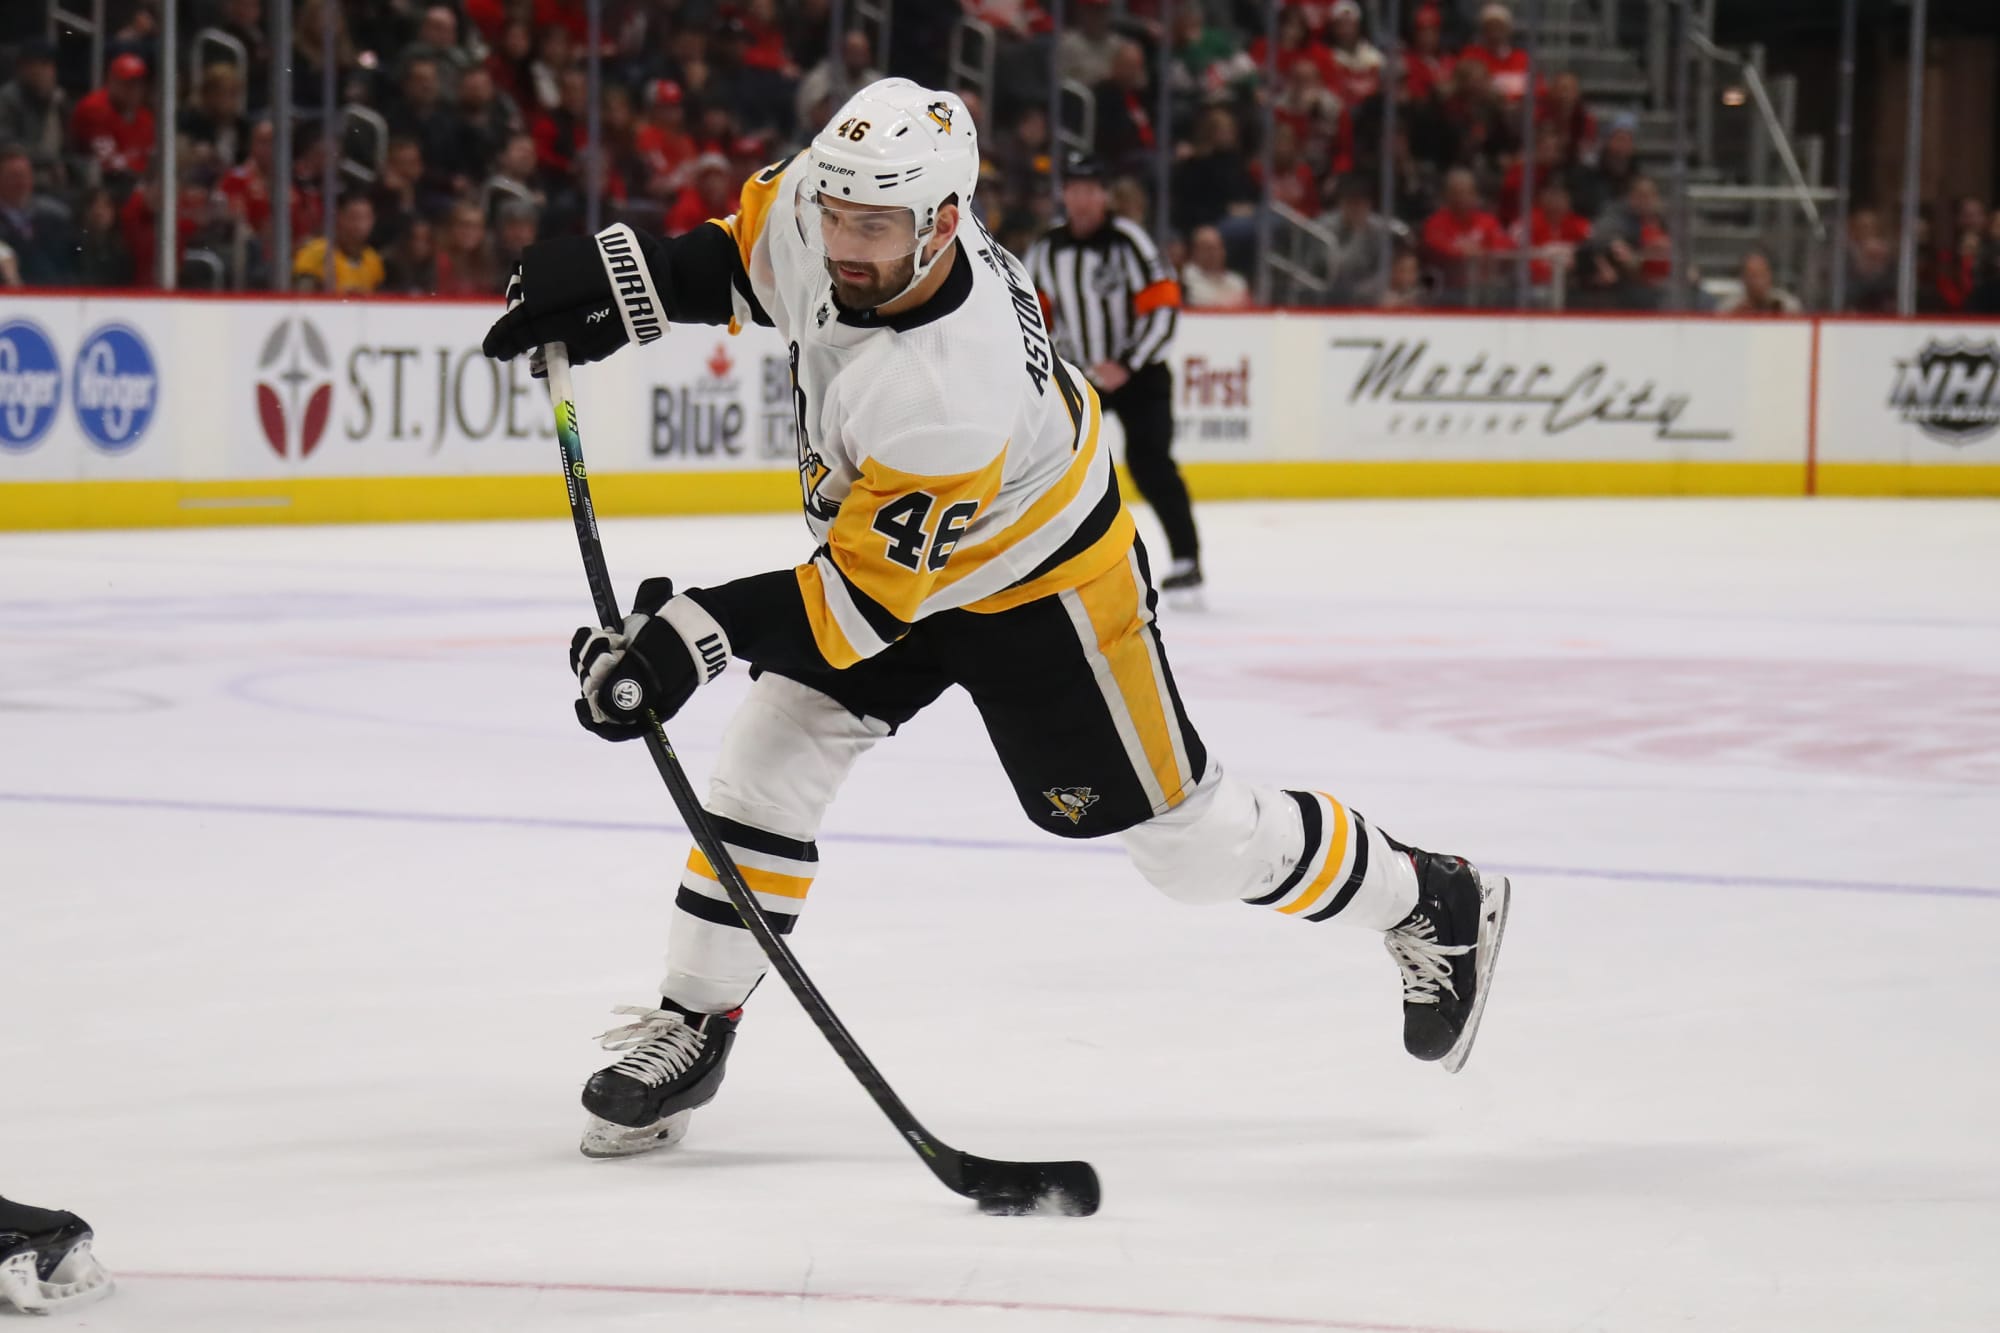 Pittsburgh Penguins on X: On April 20, the Penguins will take the ice in  military green warmup jerseys designed by Zach Aston-Reese who has an  undergraduate degree in graphic design from Northeastern.